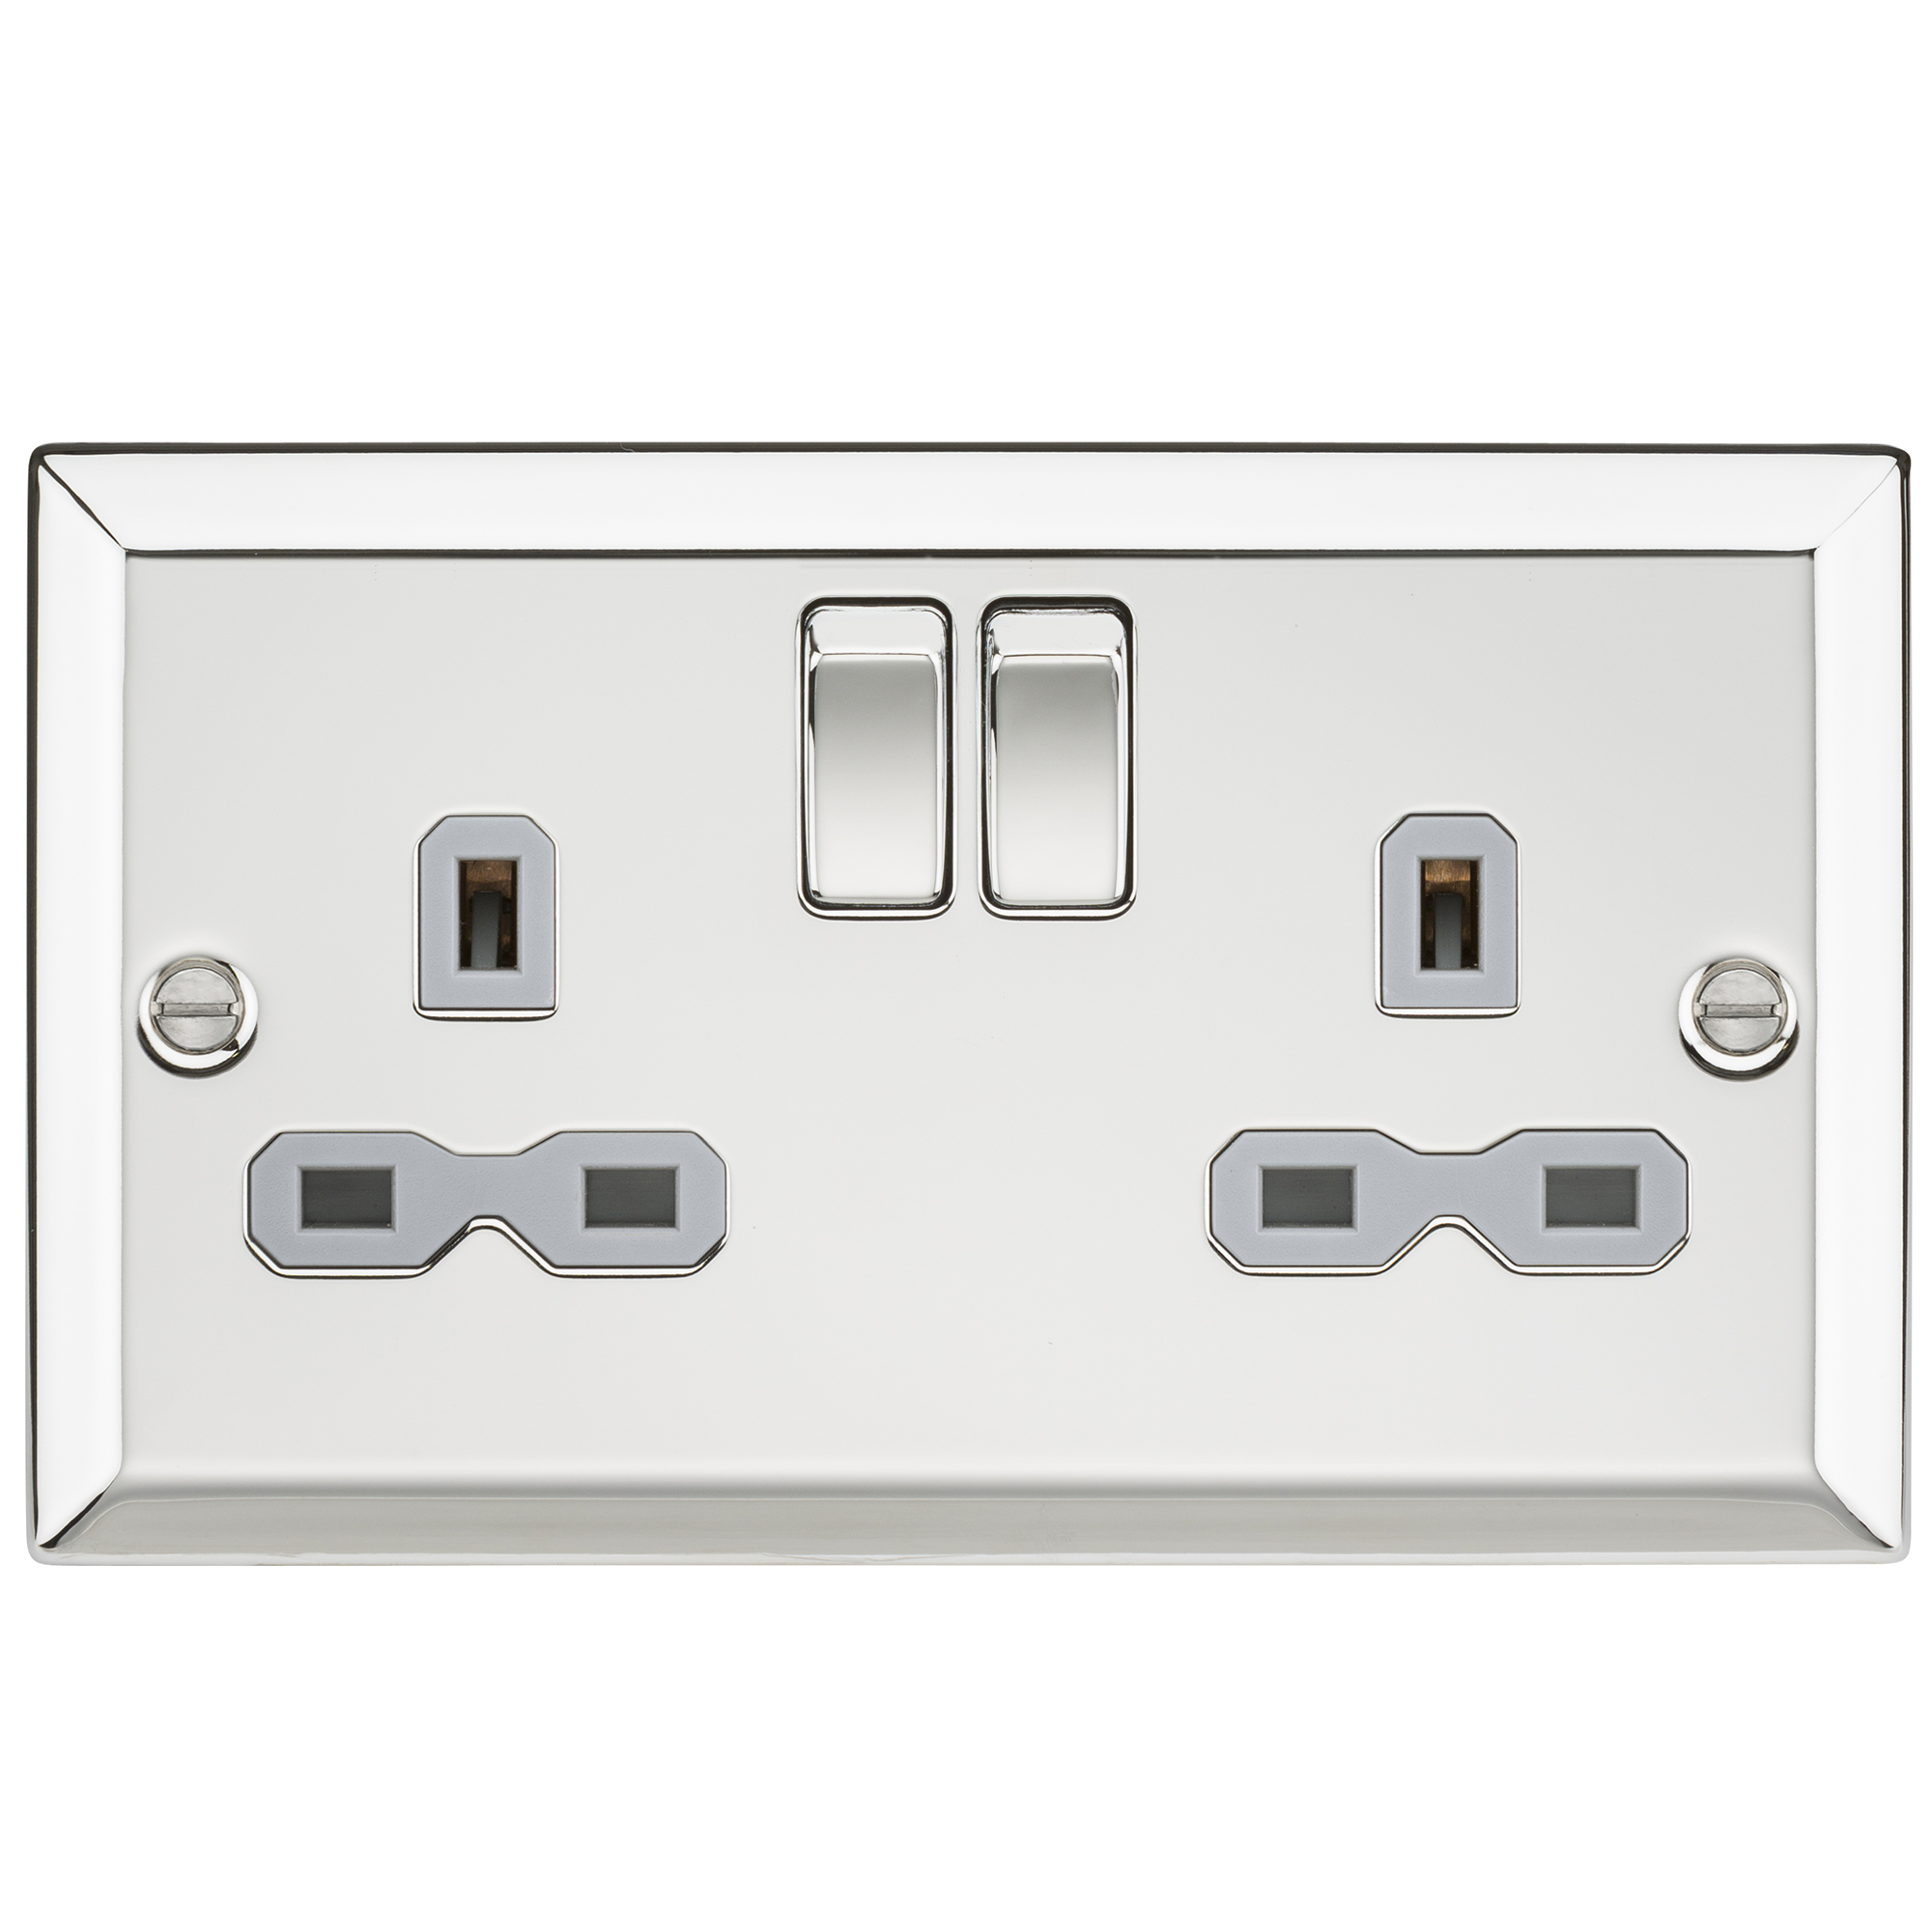 13A 2G DP Switched Socket With Grey Insert - Bevelled Edge Polished Chrome - CV9PCG - SOLD-OUT!! 